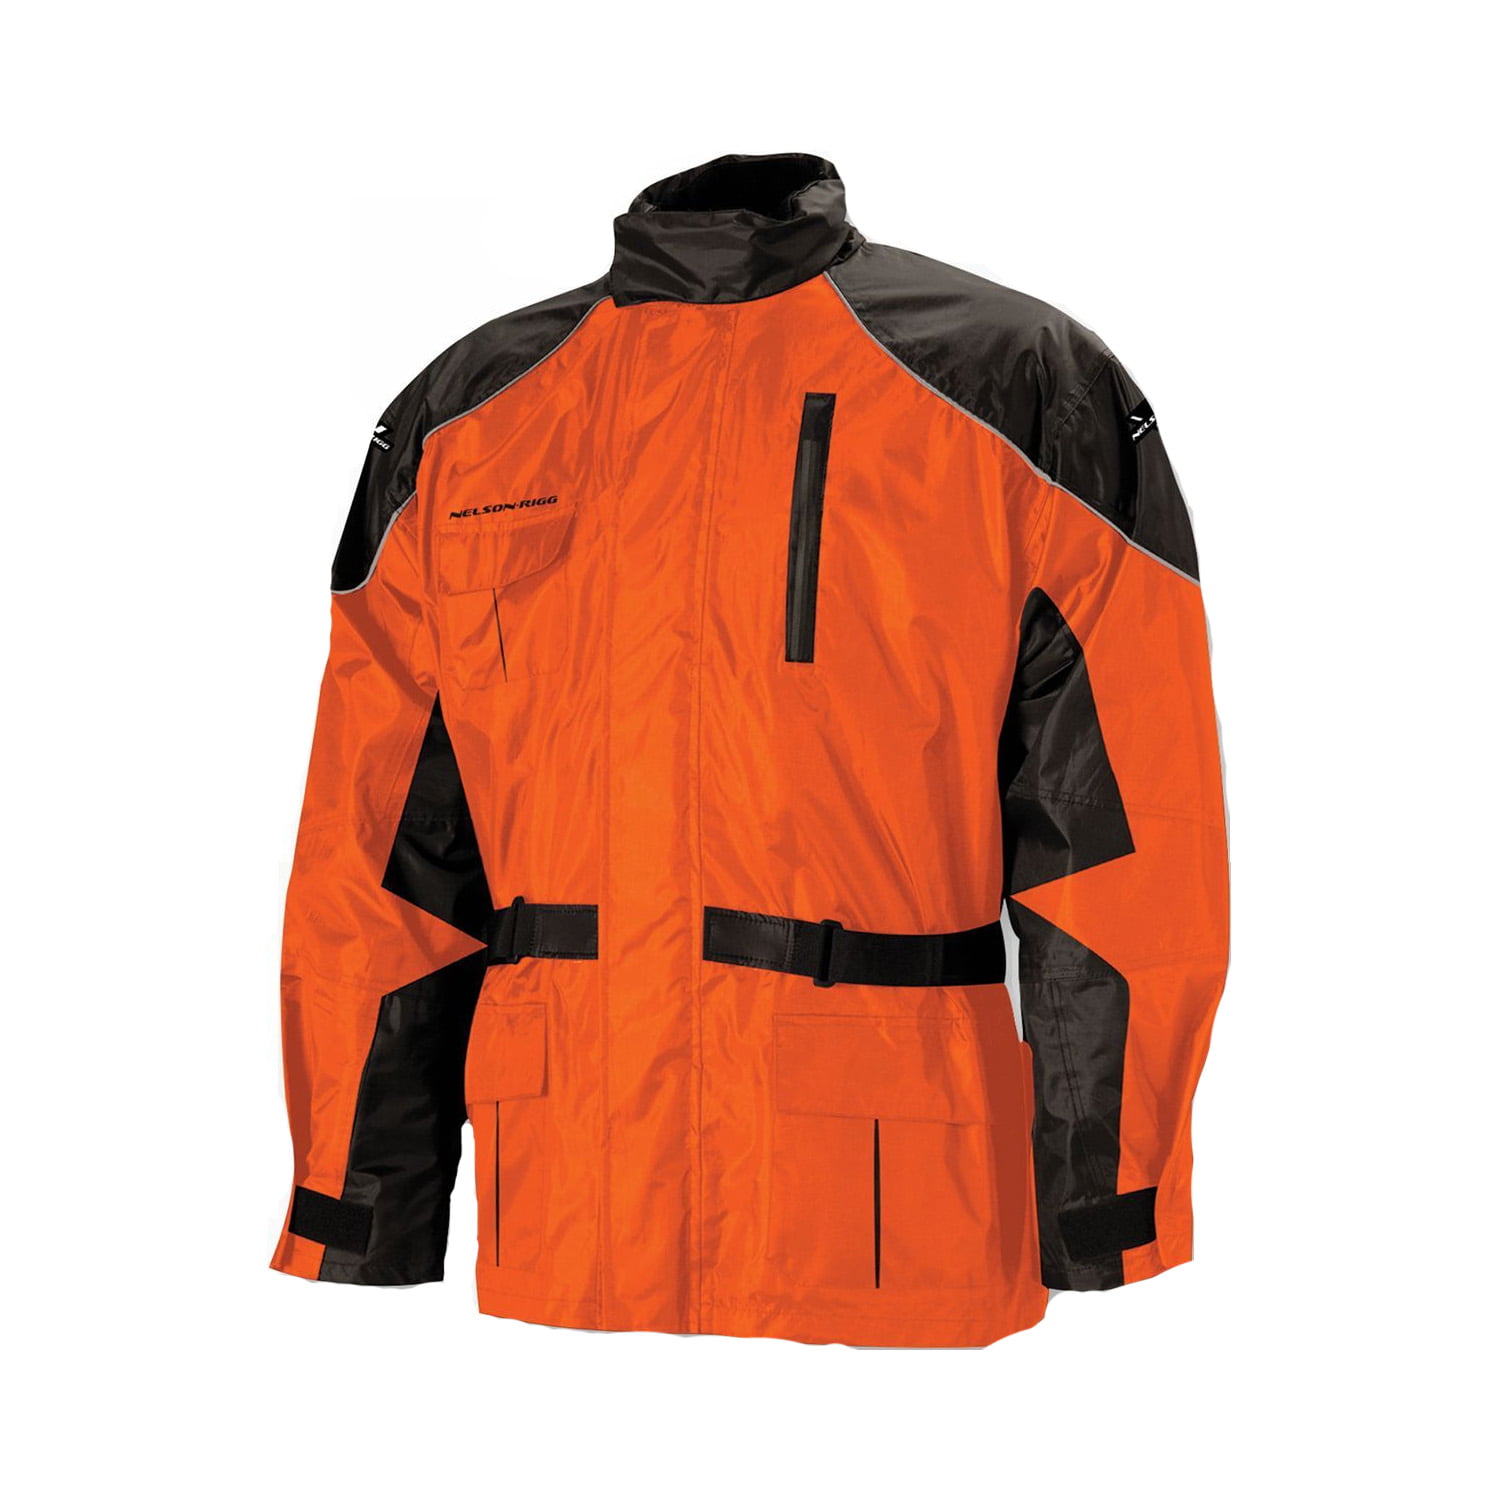 Nelson Rigg Unisex-Adult Waterproof Compact Pack Jacket. 